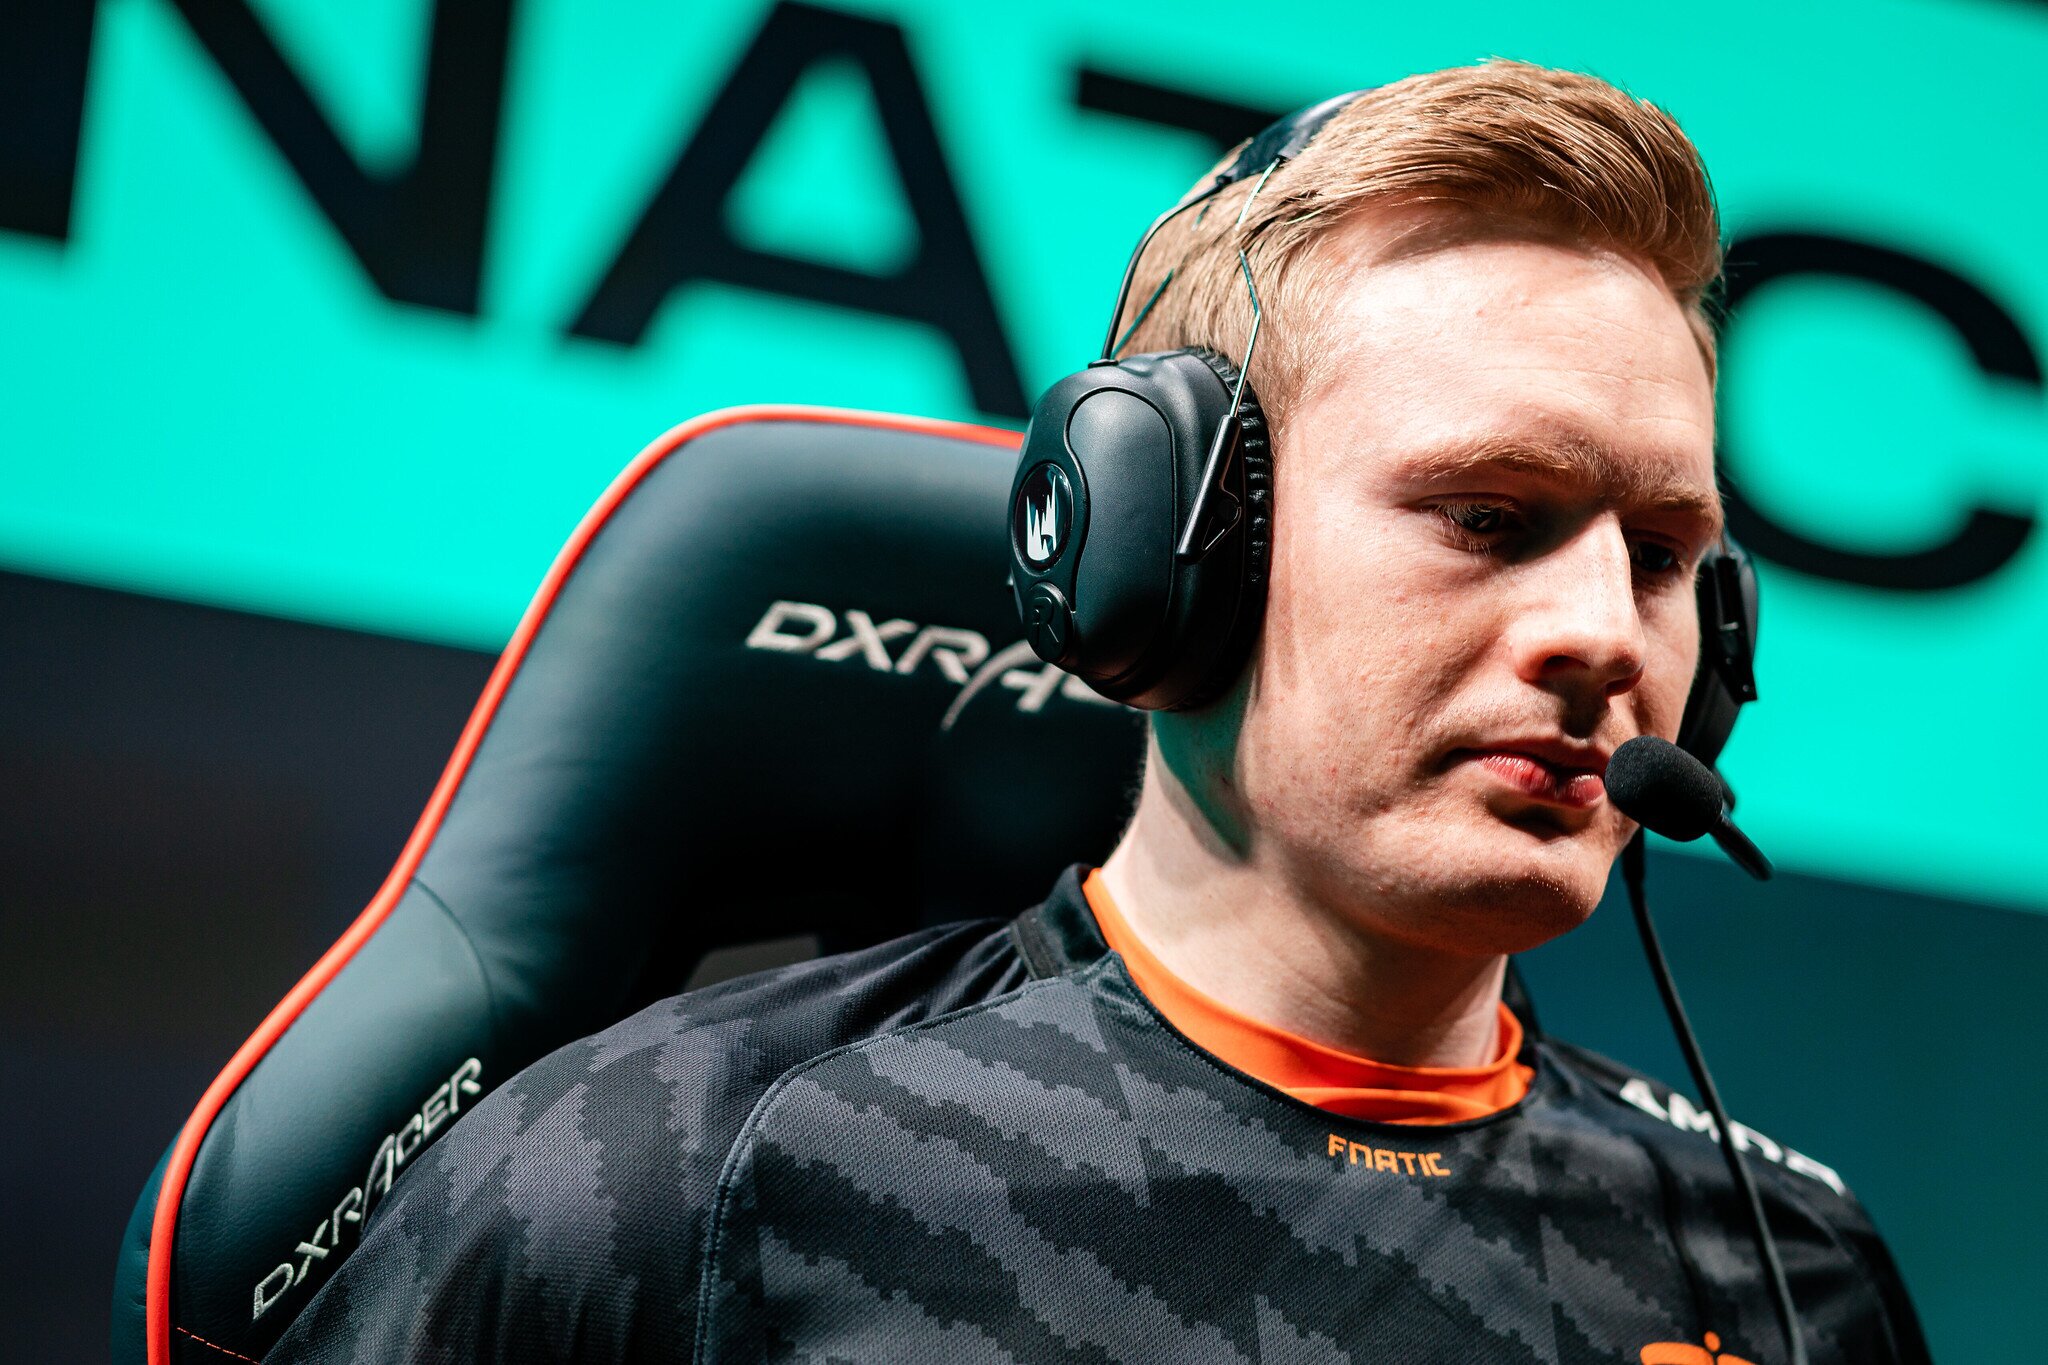 Broxah (pictured), Cain and Shernfire may not find their way to Team Liquid before the start of the season due to Visa issues (Photo via Riot Games)